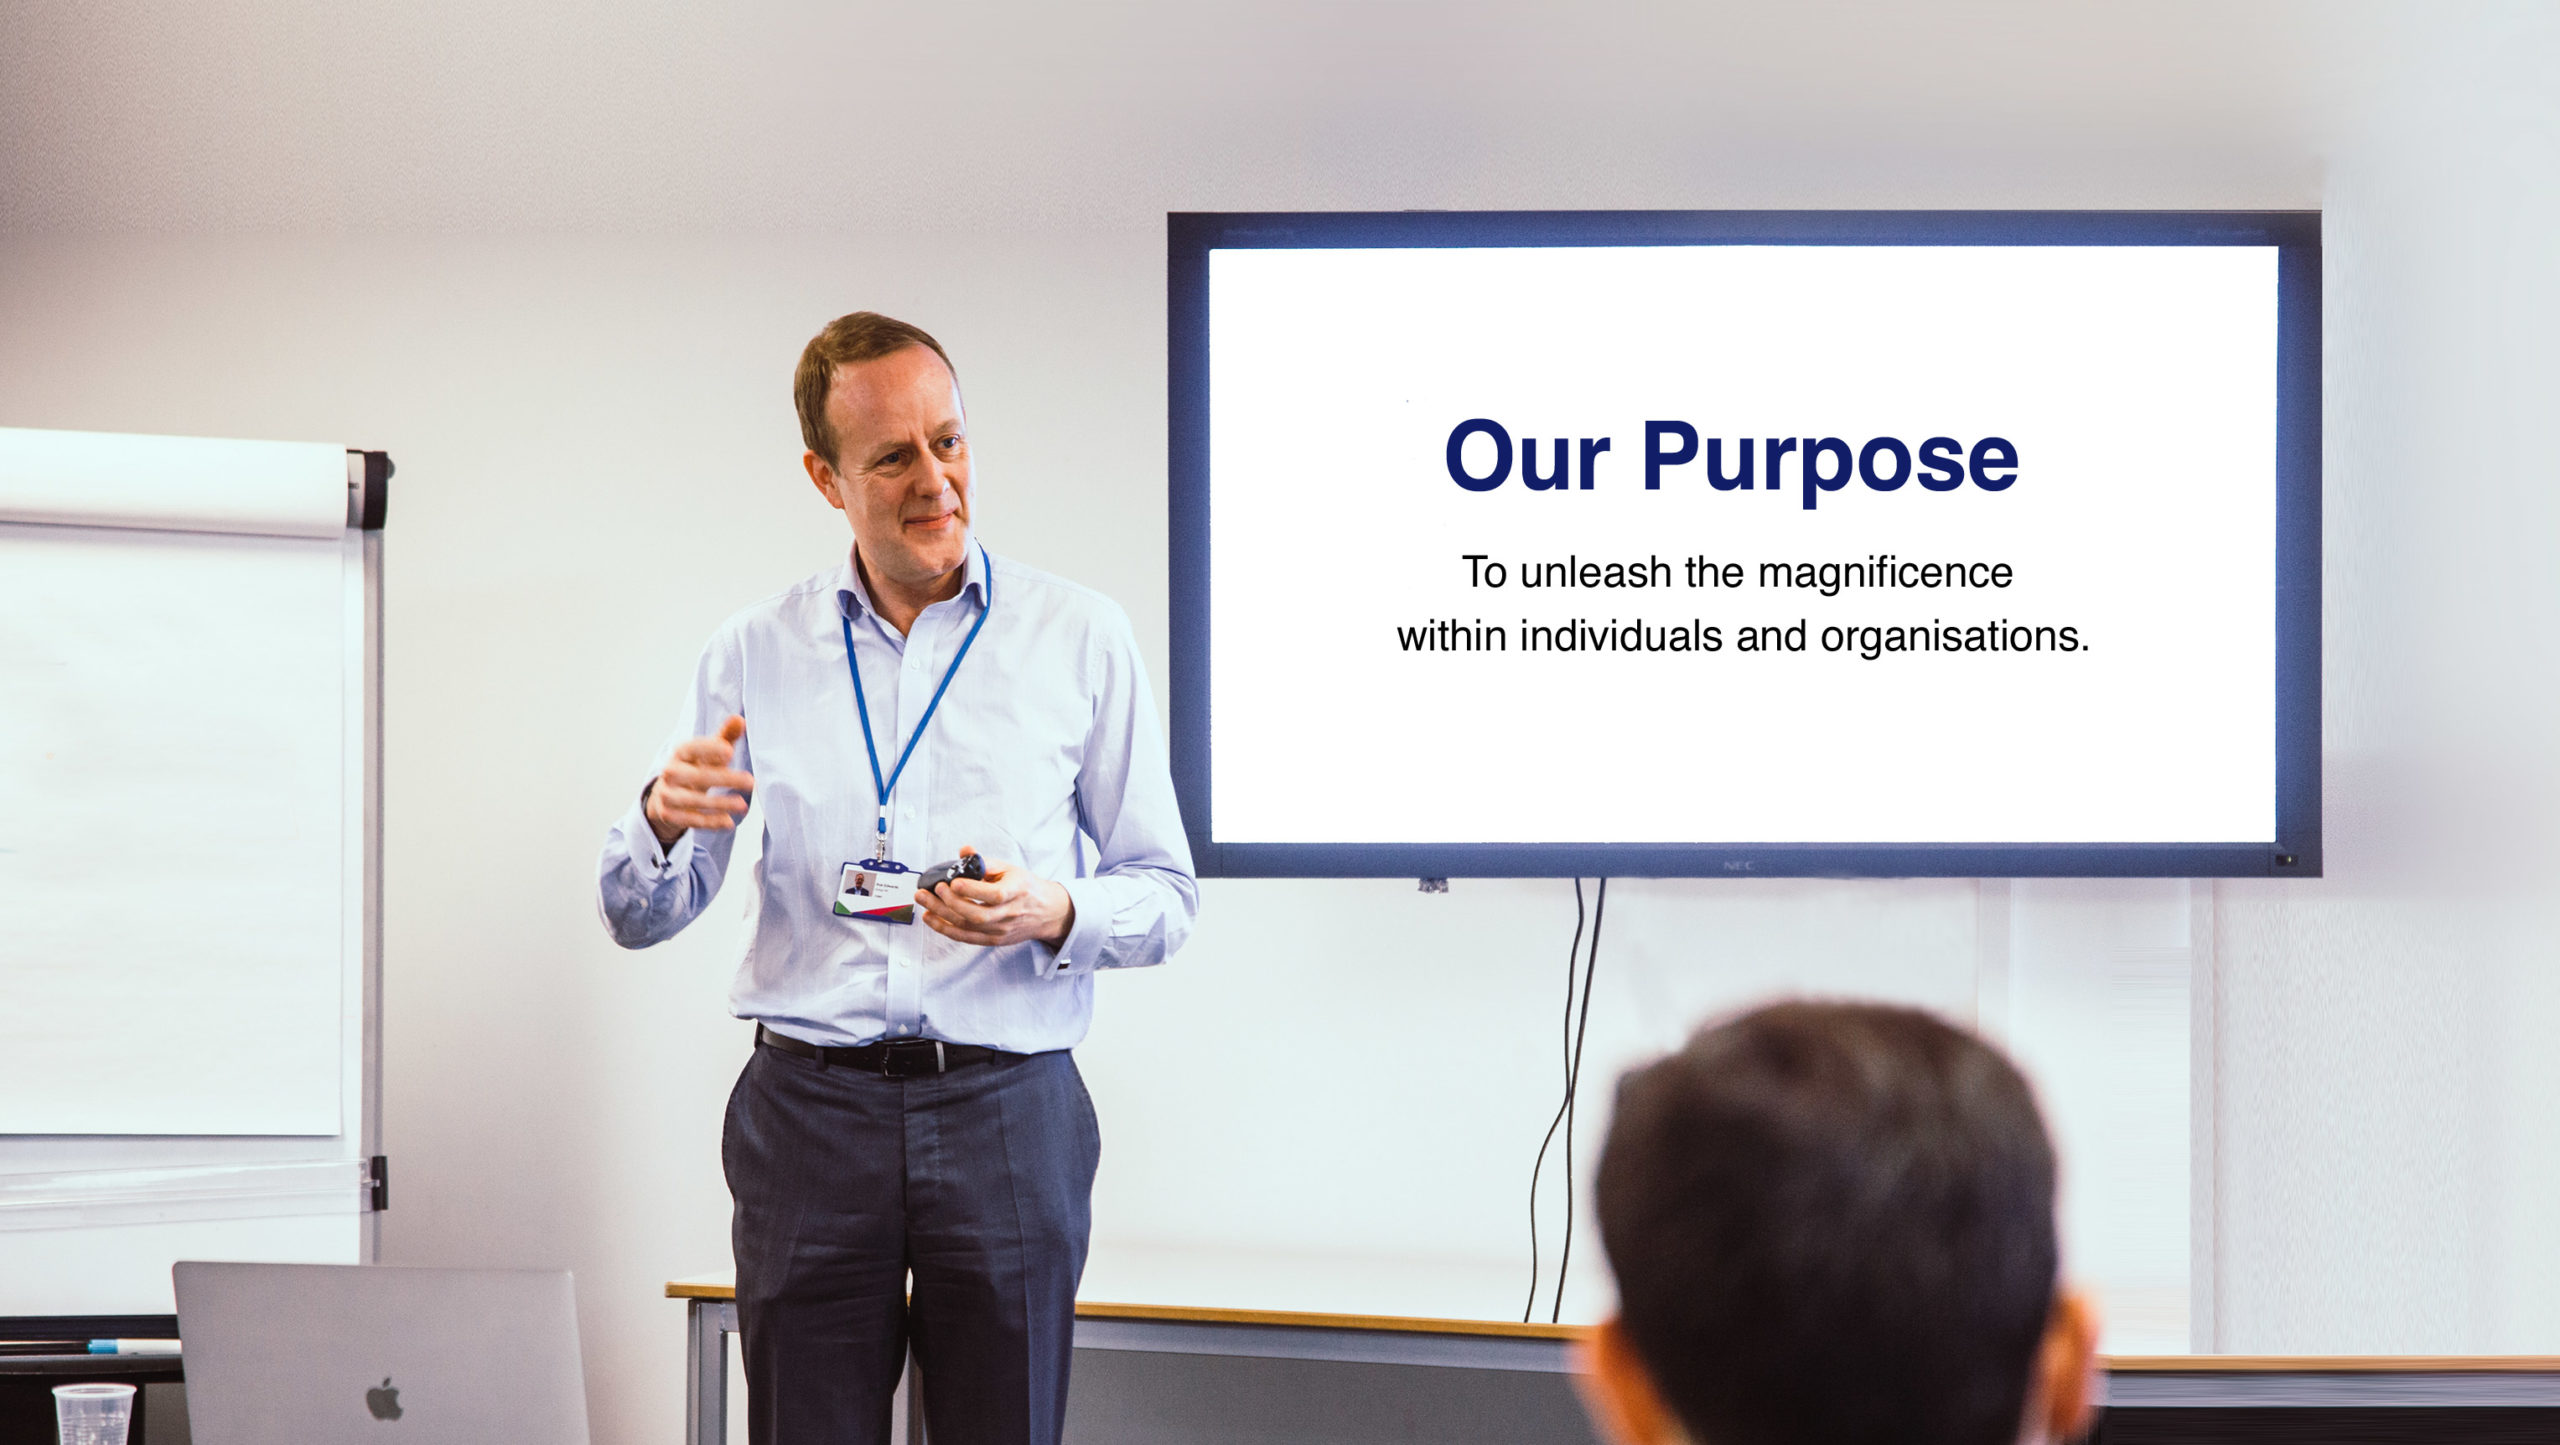 Our Purpose : To unleash the magnificence within individuals and organisations.